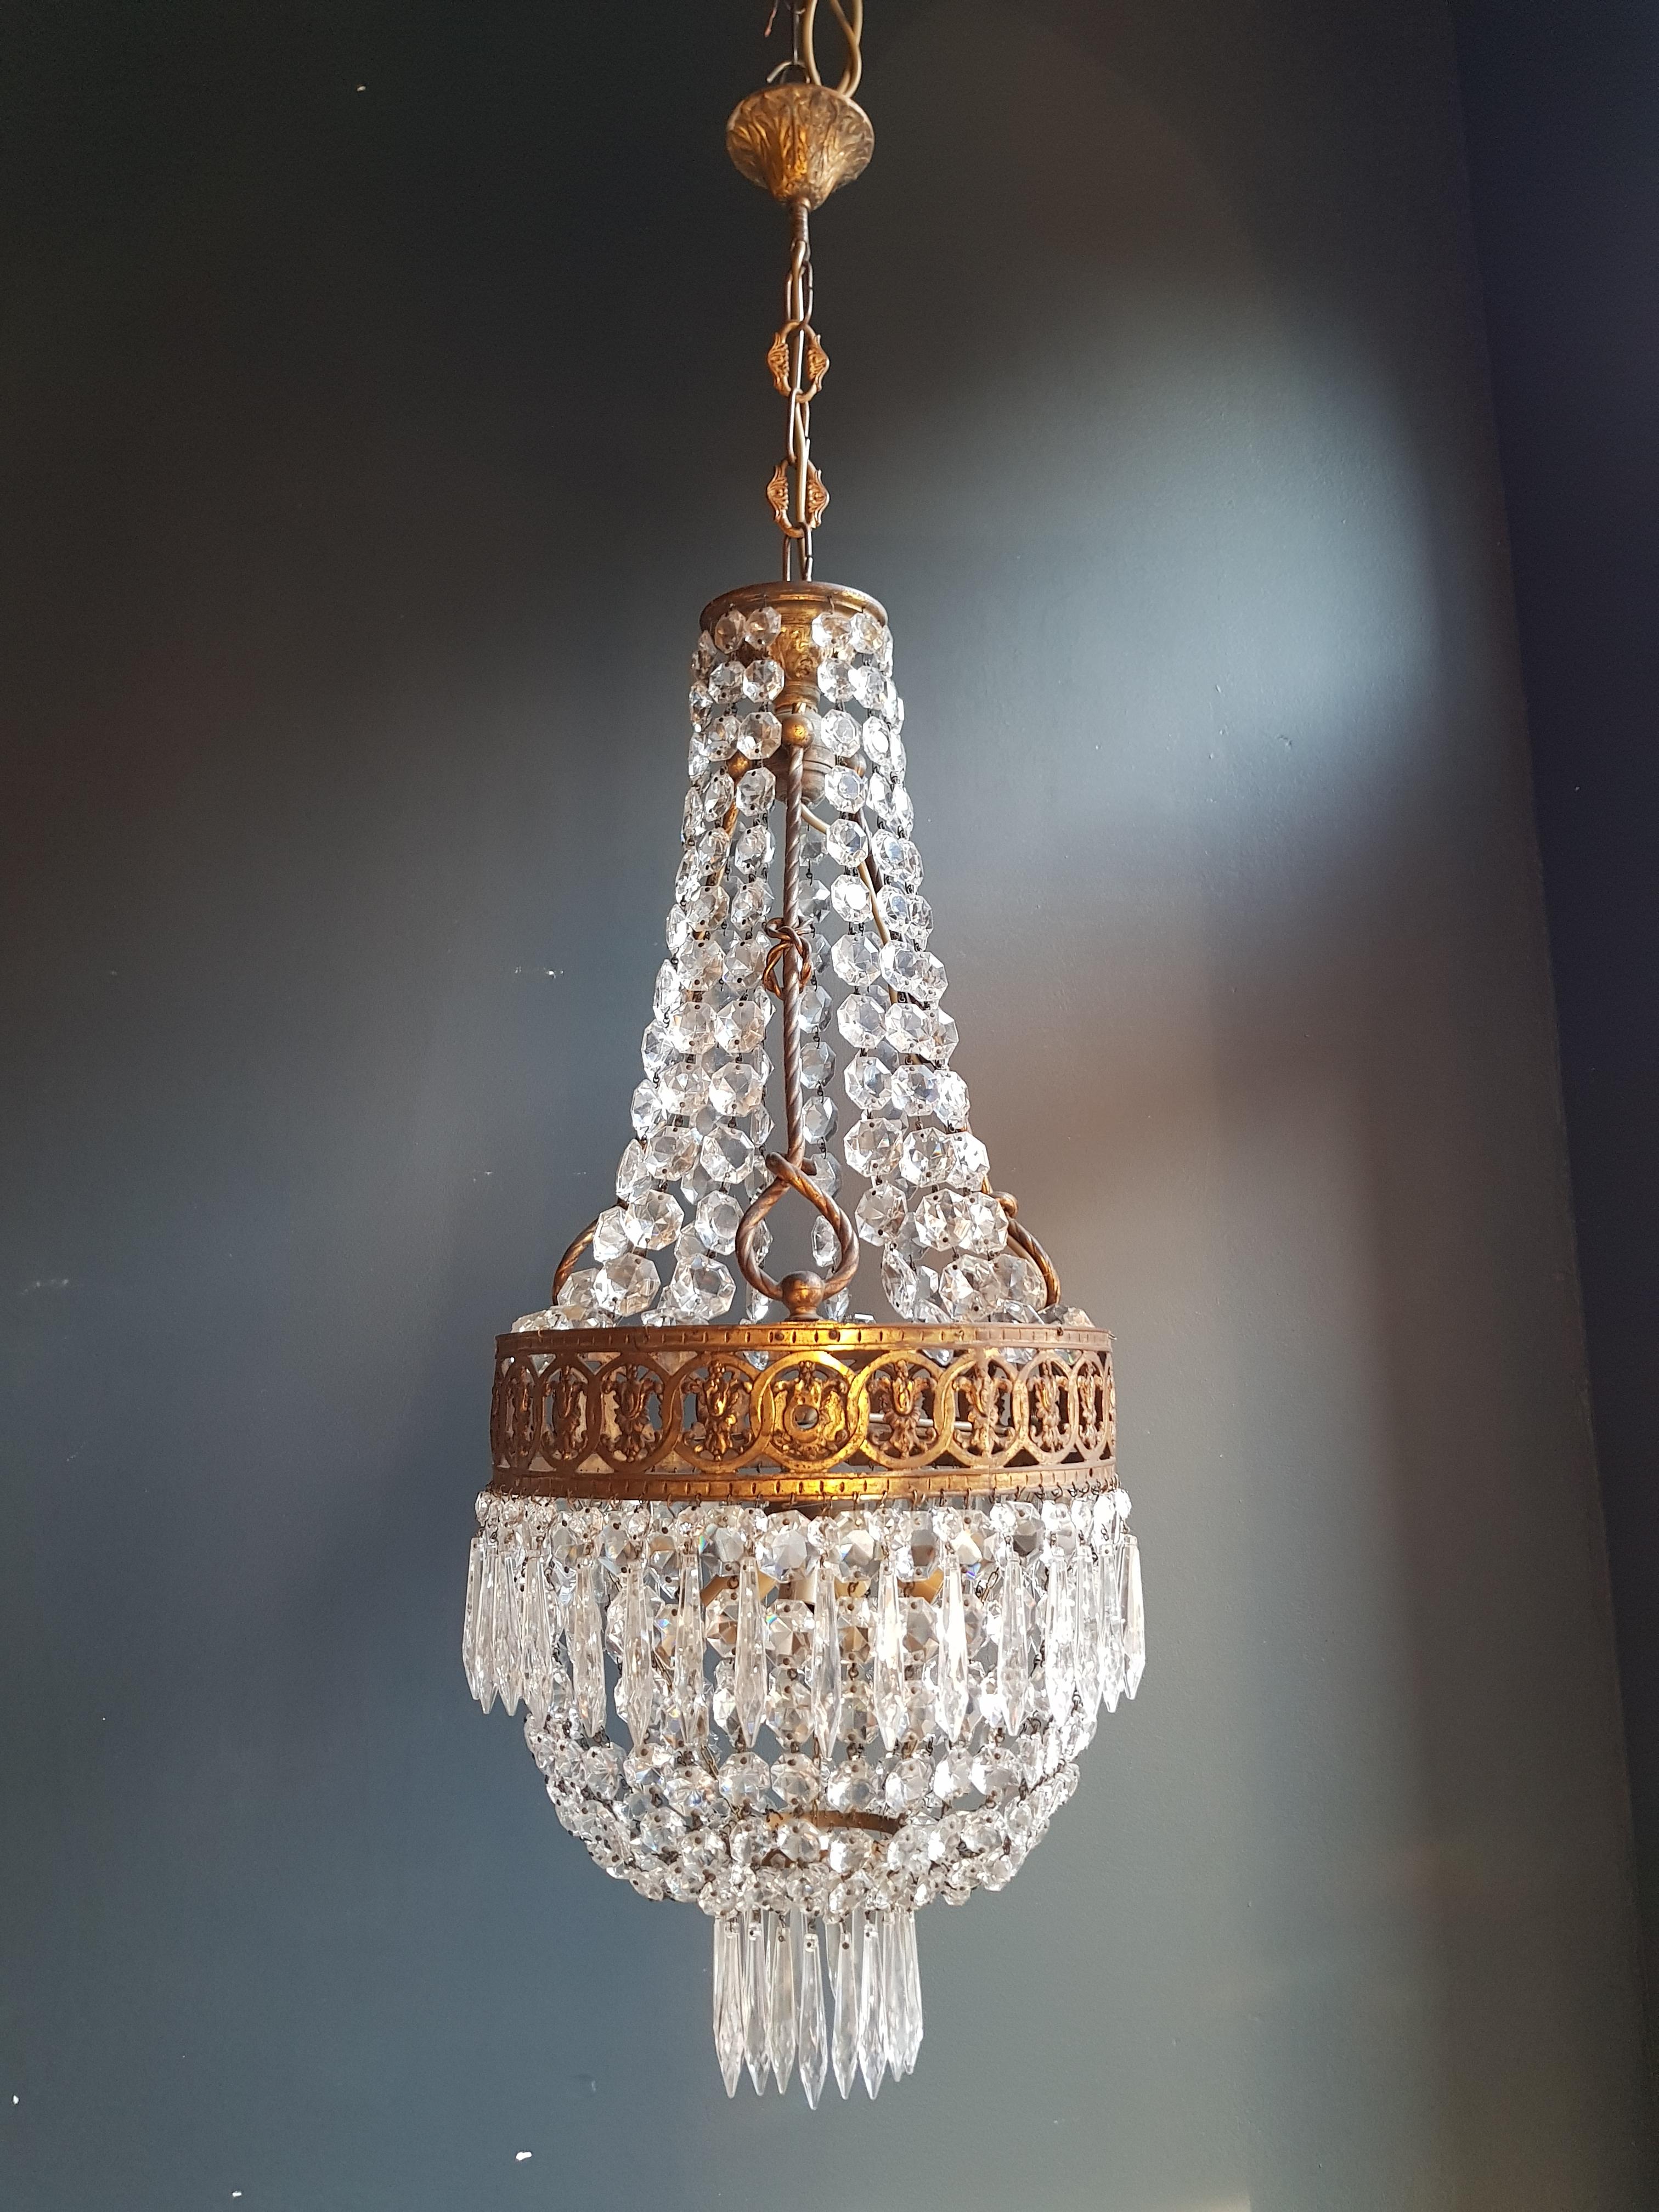 Presenting an exquisite brass Empire crystal lustre ceiling lamp, an antique Art Nouveau treasure in the form of a basket chandelier.

This chandelier, dating back to circa 1930, is an original preserved piece with its timeless beauty intact. It has